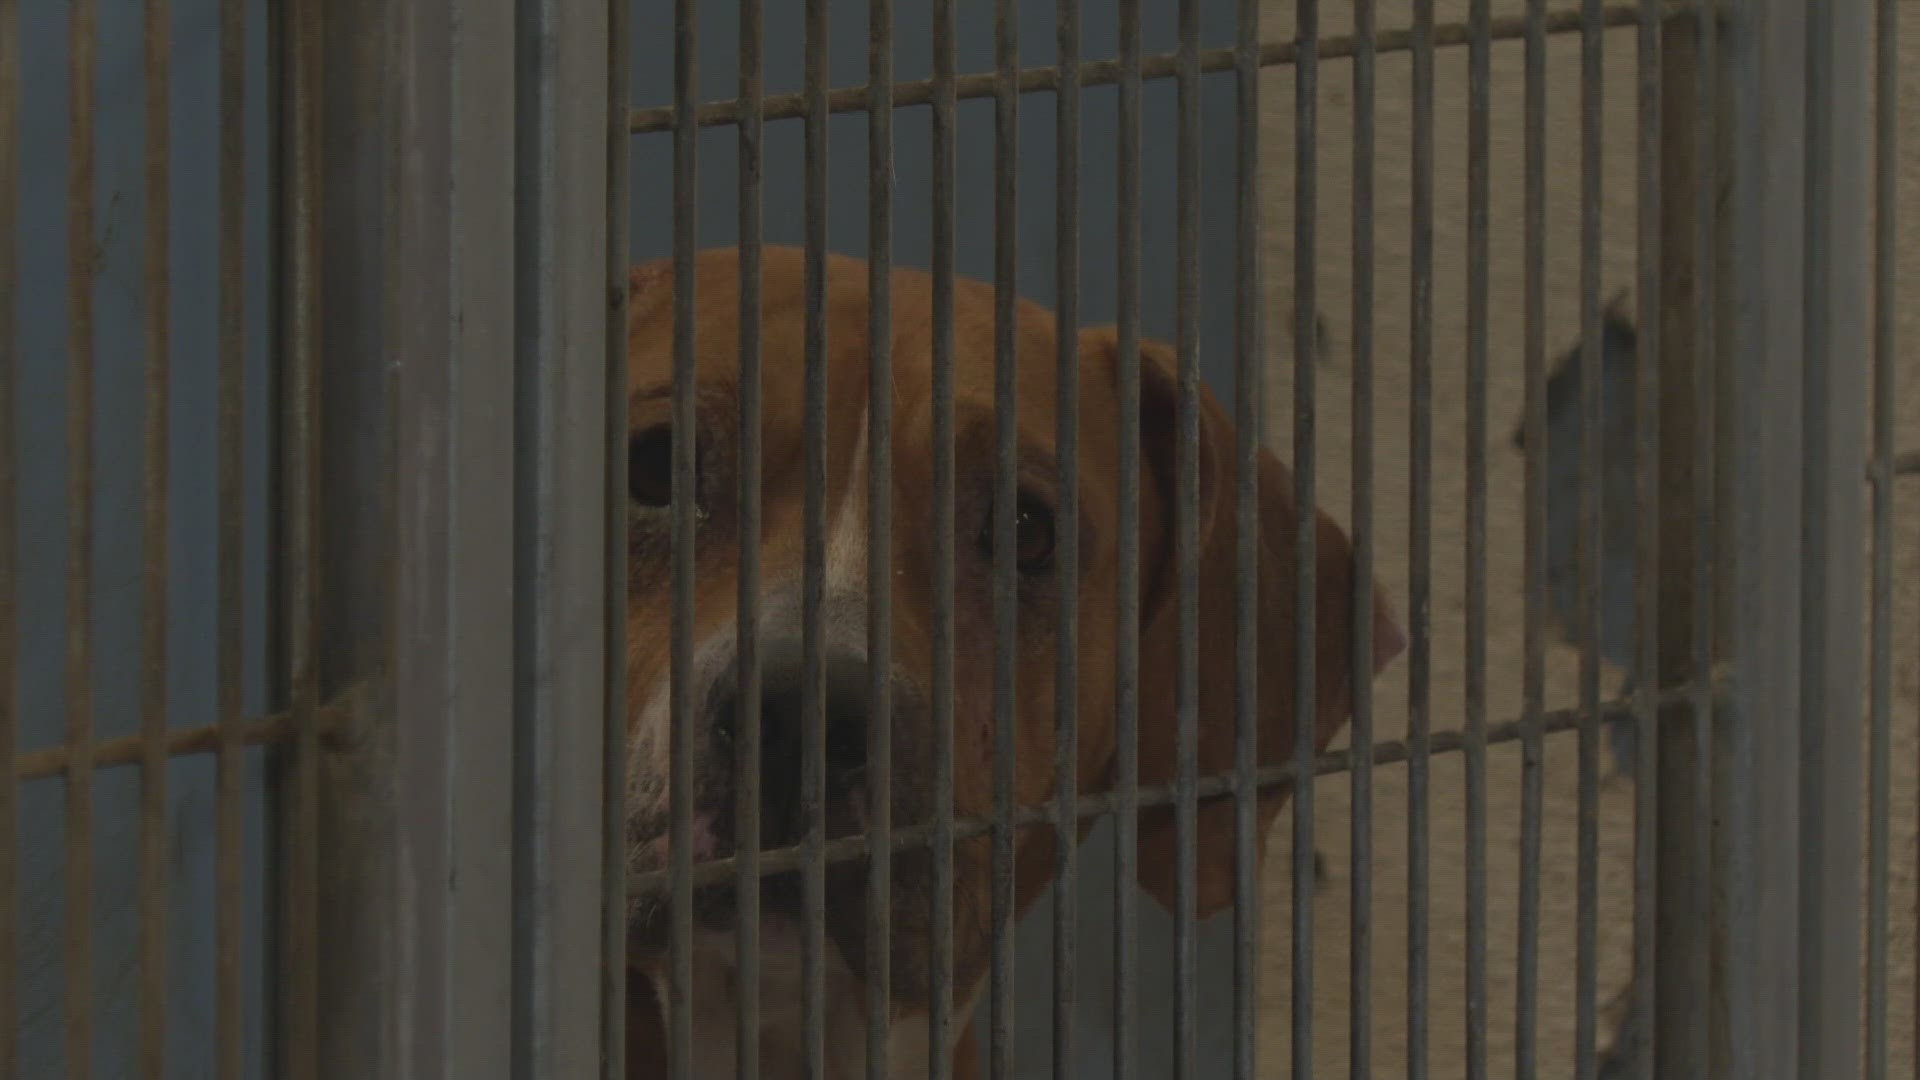 Jacksonville's Animal Care and Protective Services says there are more than 200 dogs available to adopt for free but, there may be a $20 city licensing fee.